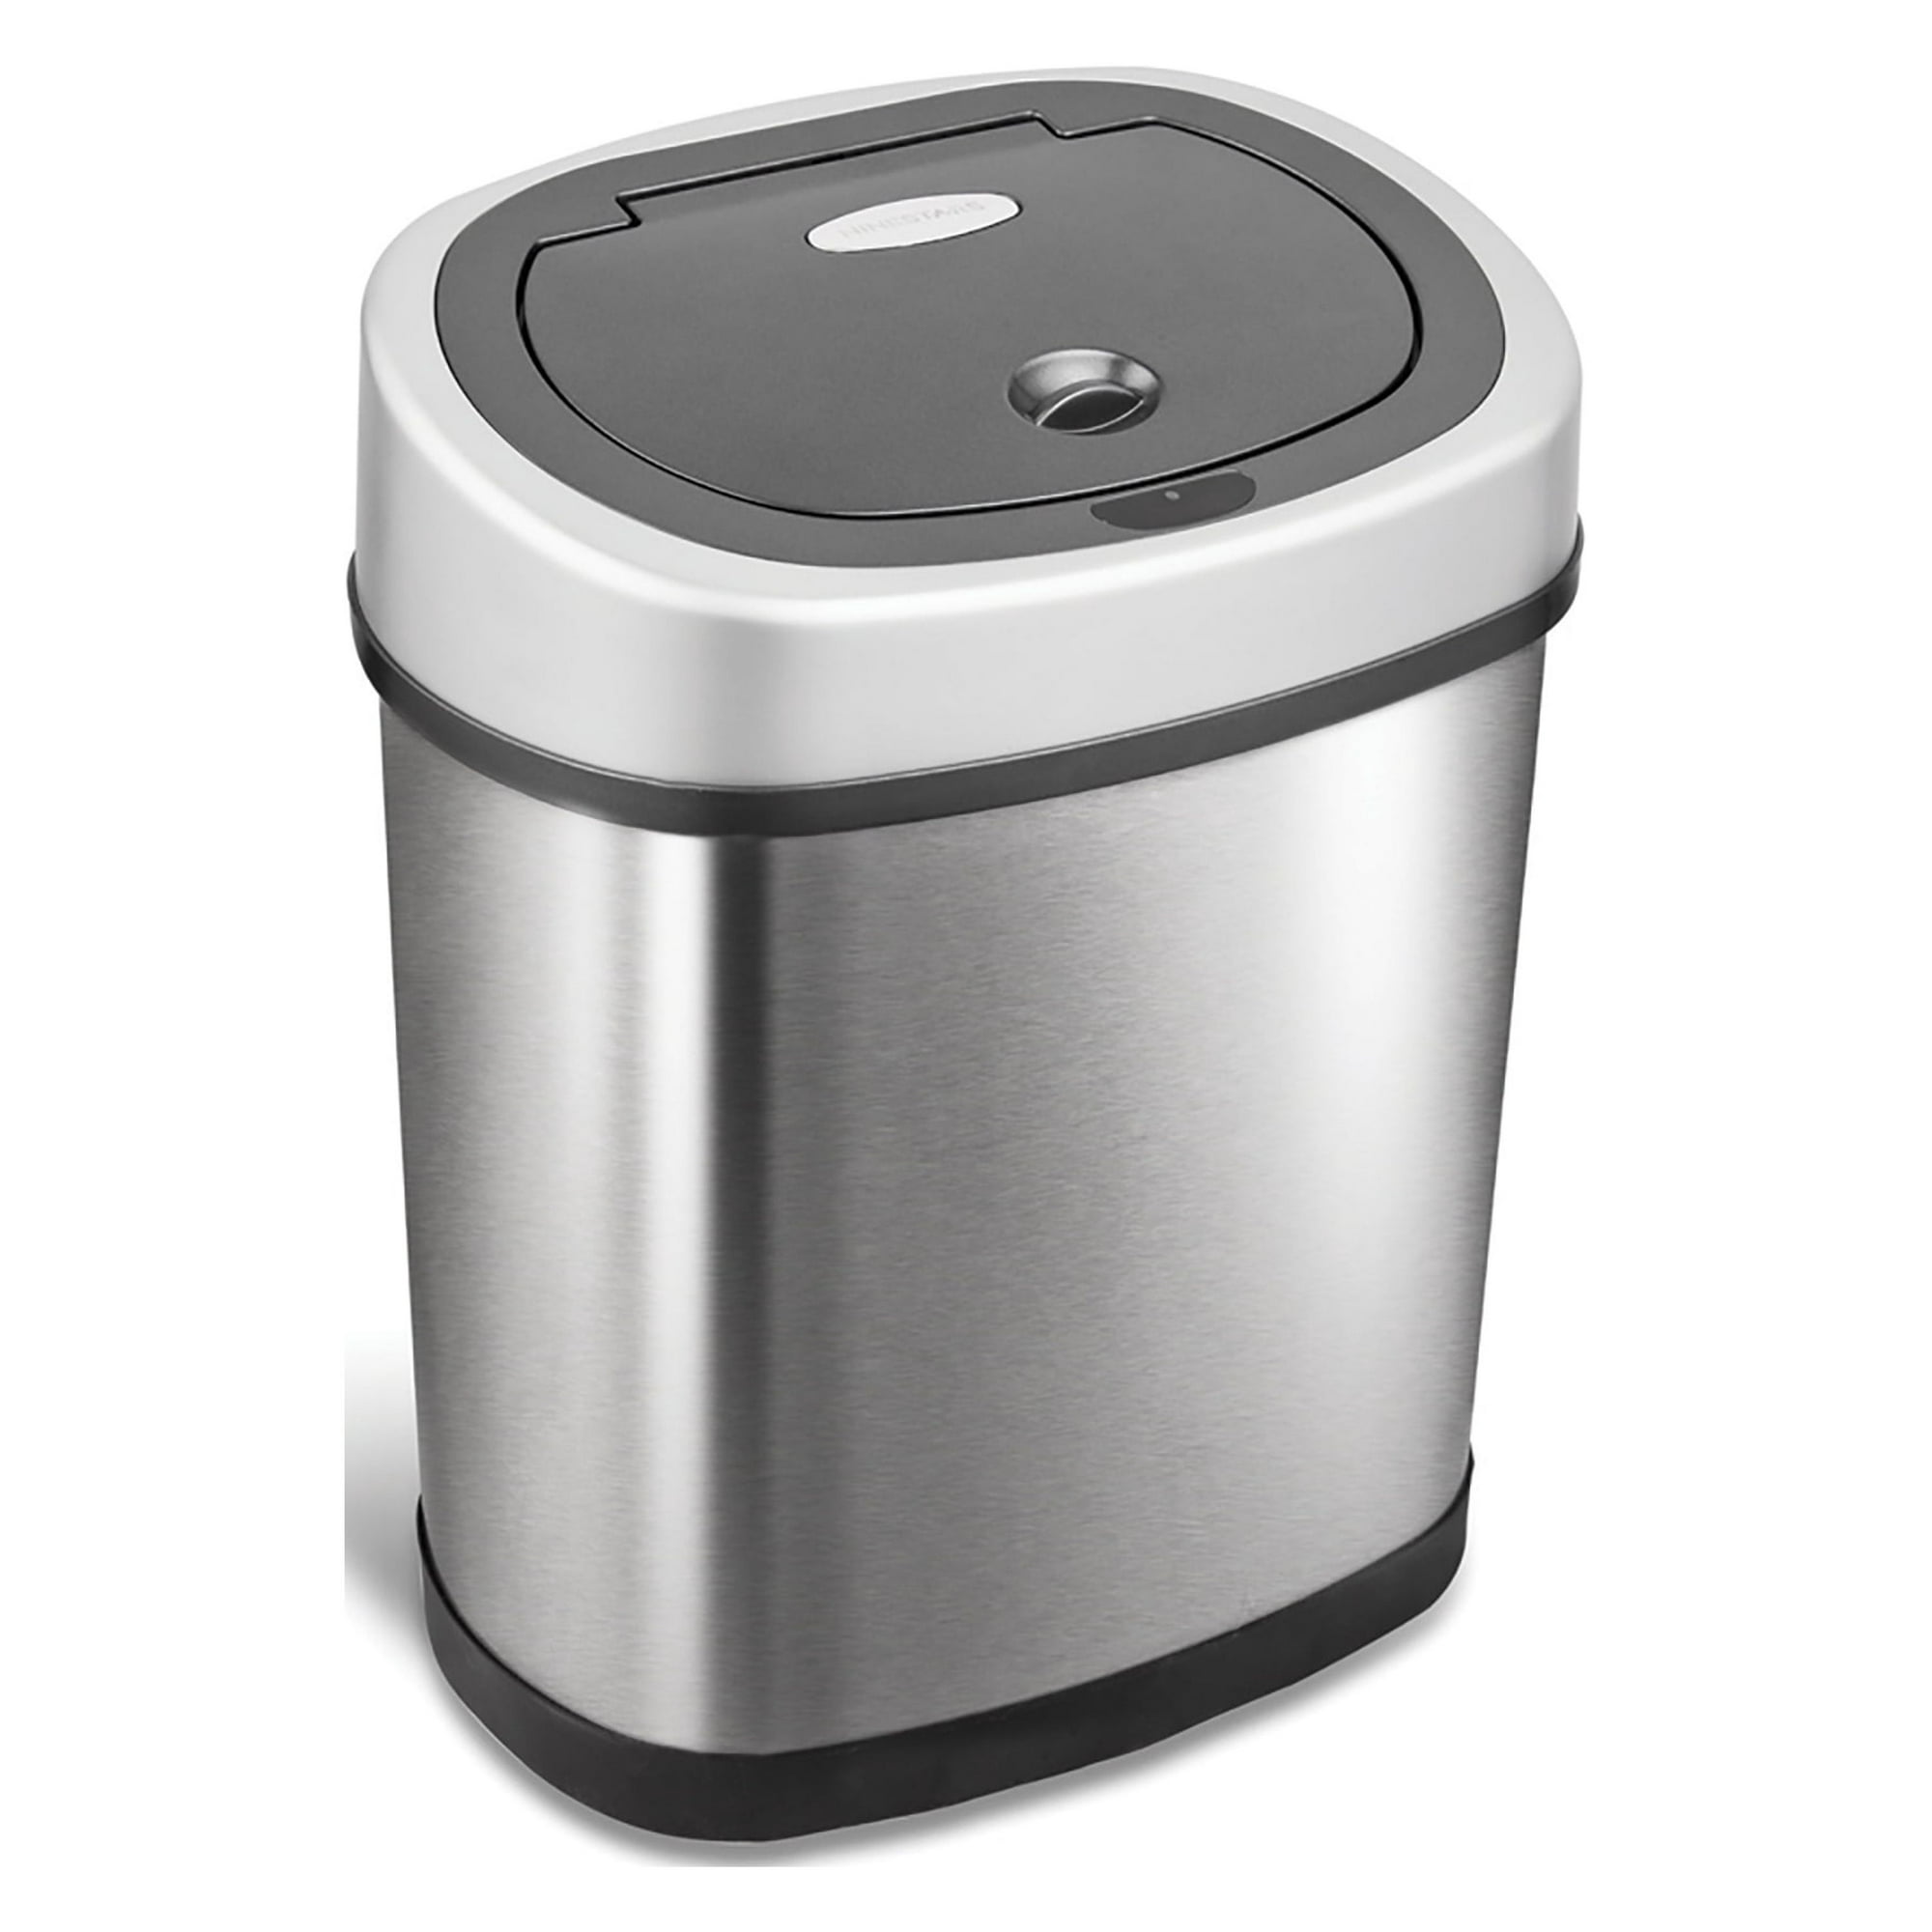 Bigacc Trash Can, 13 Gallon Touch-Free Motion Sensor Stainless